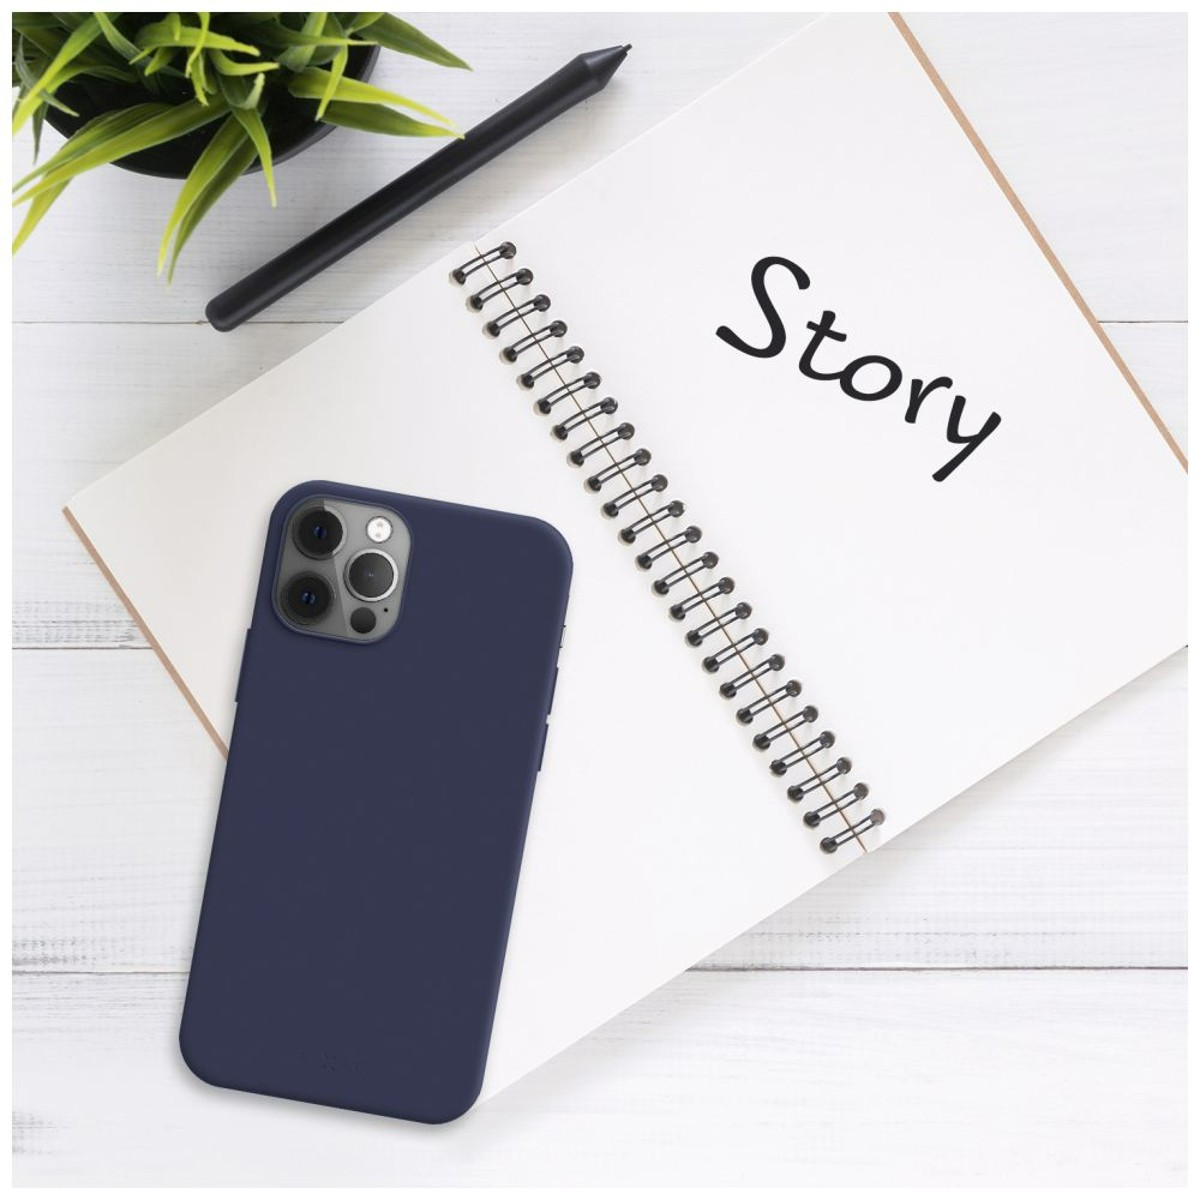 FIXST-1097-BL, Lite, Soft-Touch Xiaomi, Backcover, Blau Story 13 FIXED